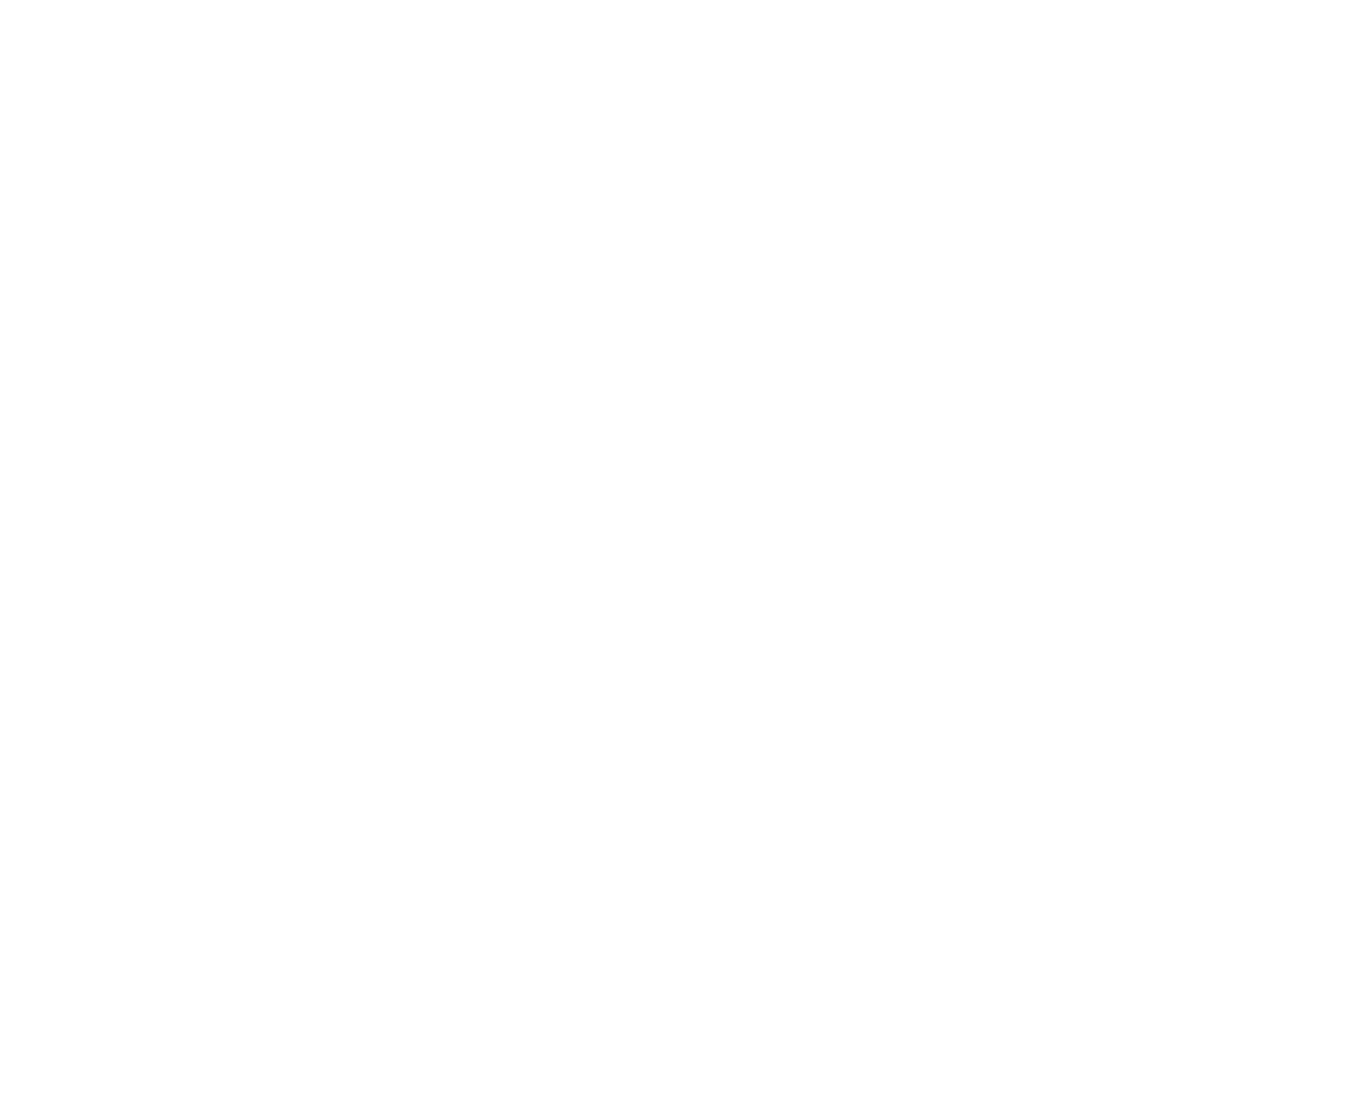 About Camozzi Group and Ingersoll Machine Tools The Camozzi Group is an Italian global leader in the production of co   